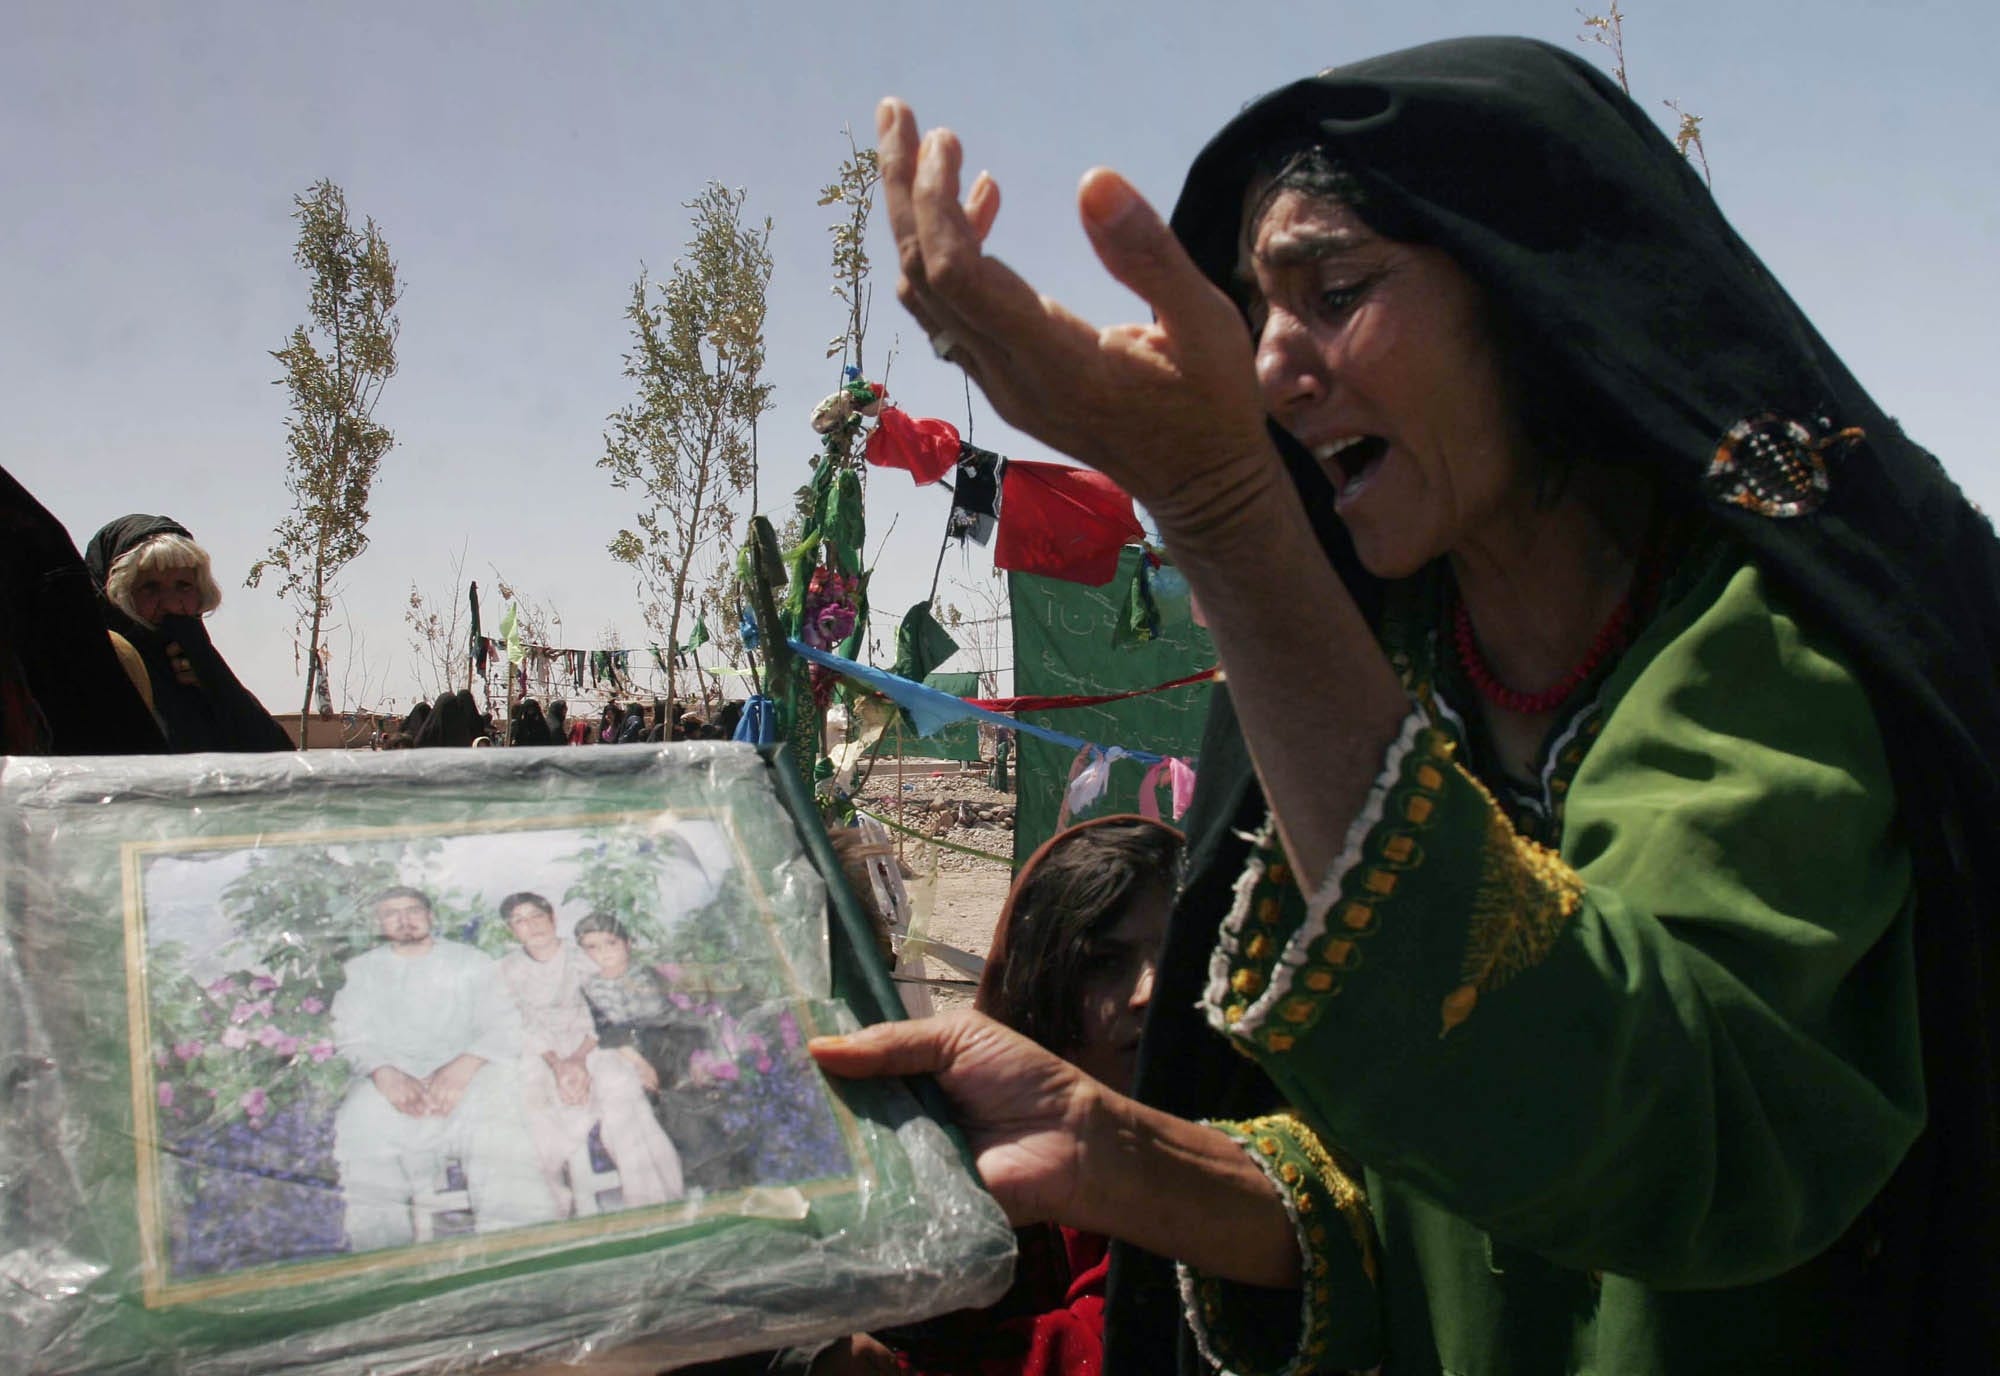 An Afghan woman mourns during a ceremony in Azizabad. She is holding a poster with photos of her family member killed in the August 22 raid.